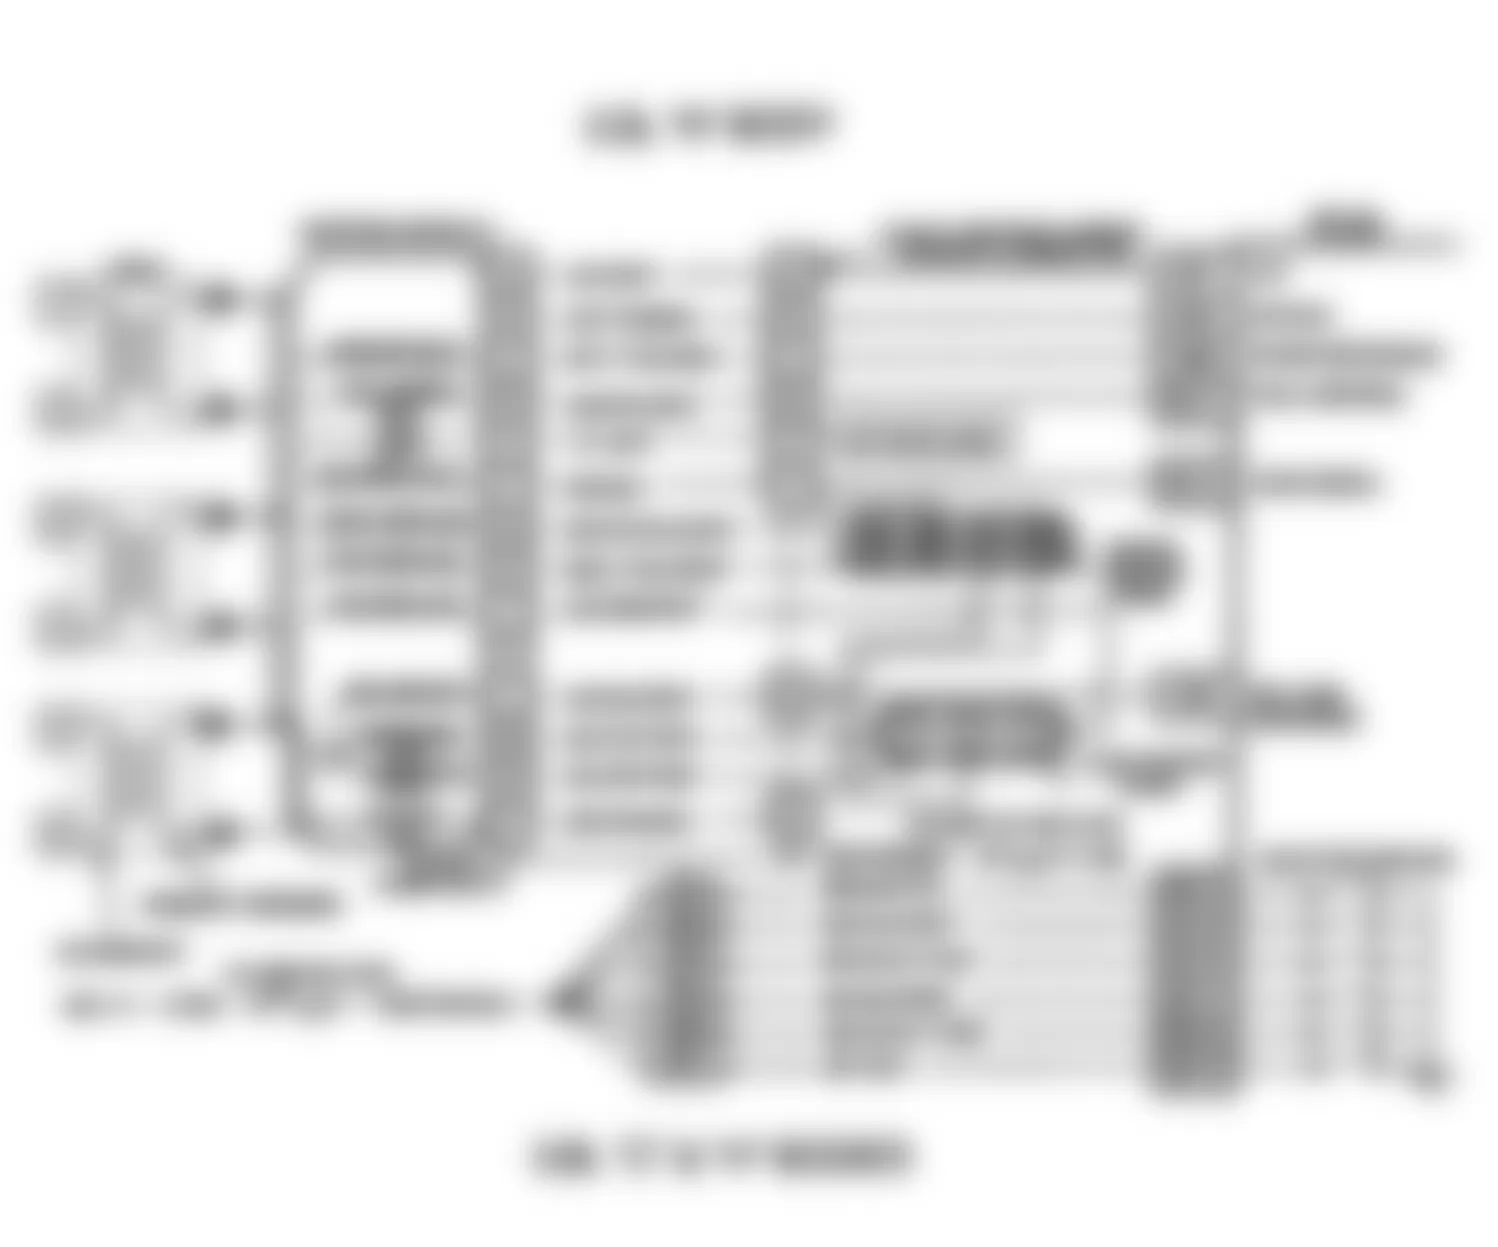 Buick LeSabre Limited 1992 - Component Locations -  Code 42, Schematic, EST Ckt Open or Grounded